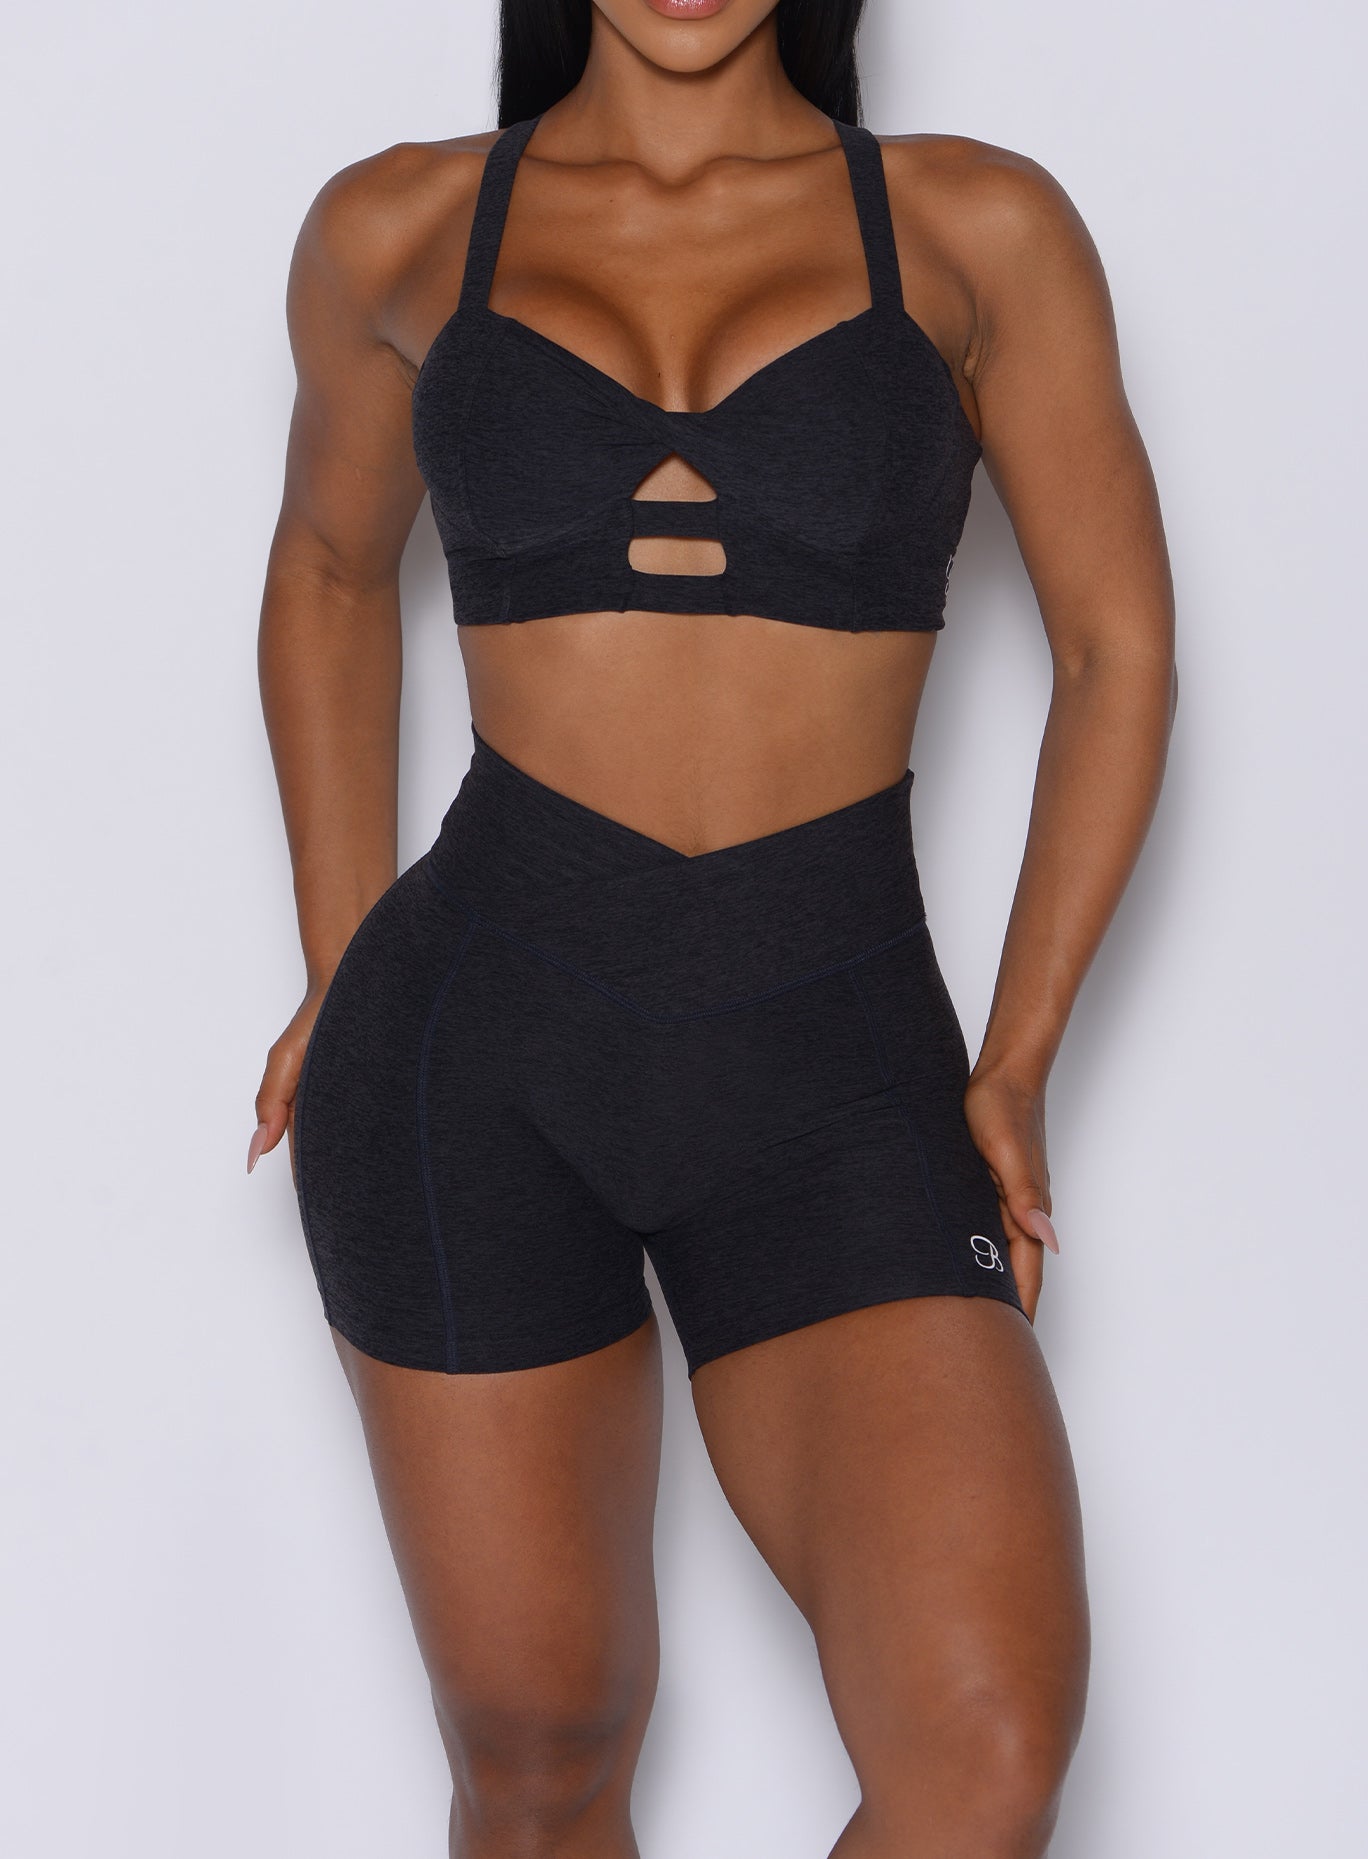 zoomed in front view of a model wearing our Tiny Waist Shorts in Onyx color and a matching sports bra